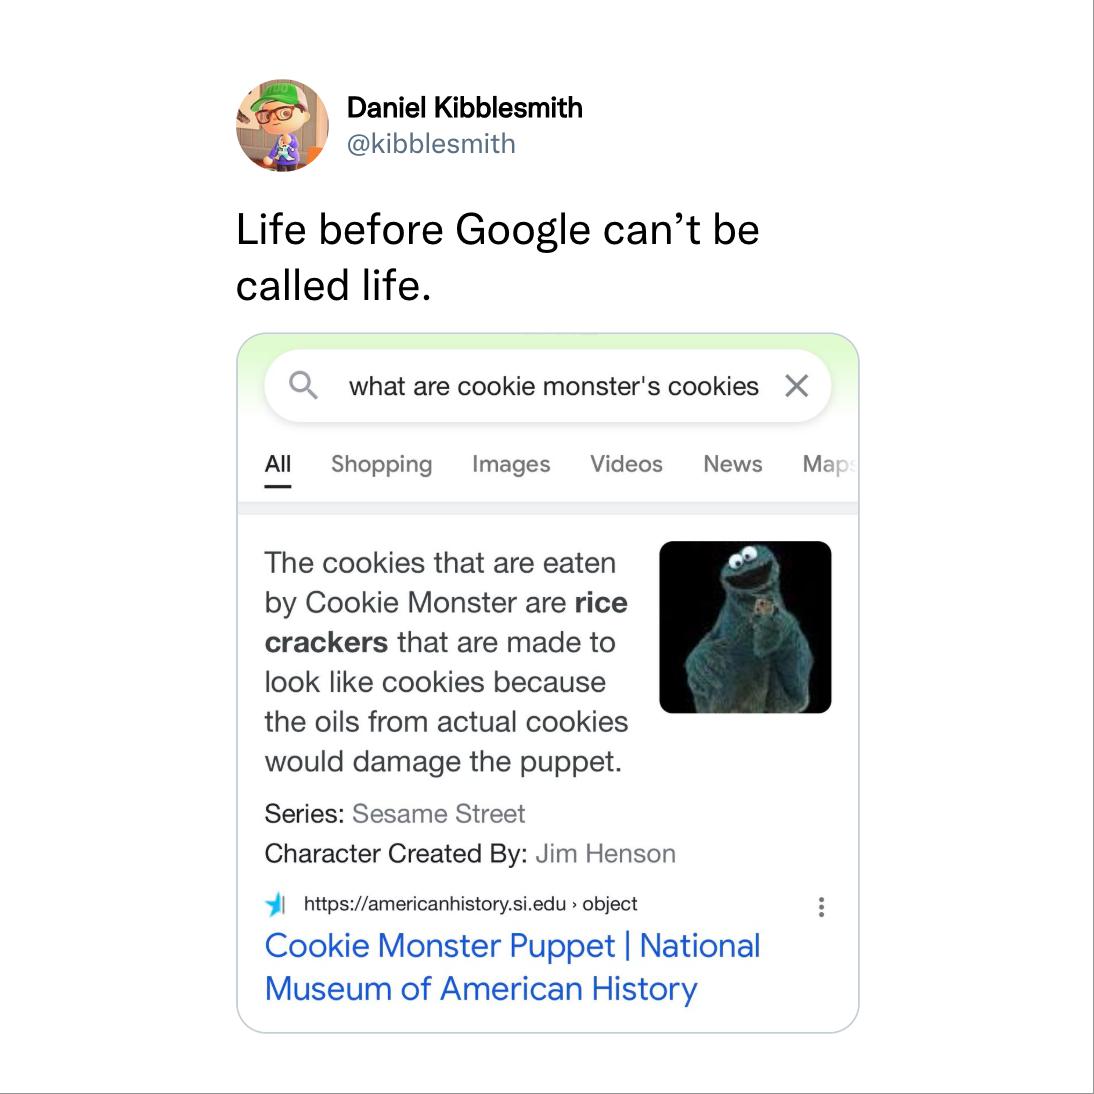 web page - Daniel Kibblesmith Life before Google can't be called life. a what are cookie monster's cookies X All Shopping Images Videos News The cookies that are eaten by Cookie Monster are rice crackers that are made to look cookies because the oils from